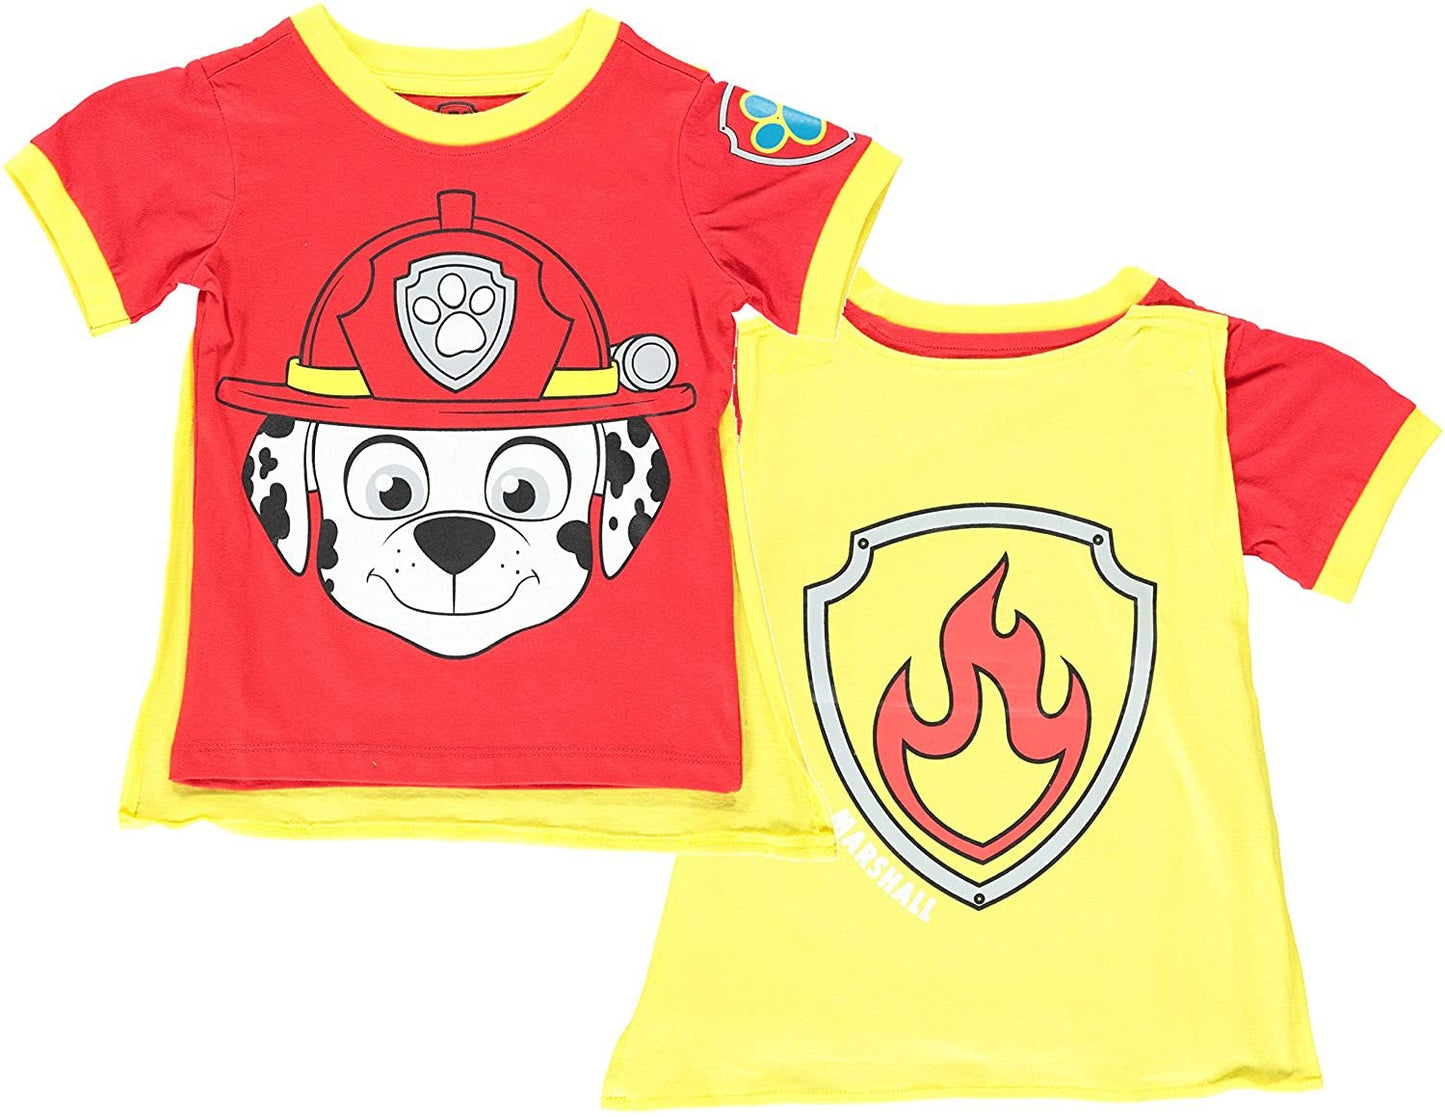 Boys Paw Patrol Cape T-Shirt - Chase, Marshall, Skye - Paw Patrol Cape Tee - Toddlers 2T-5T